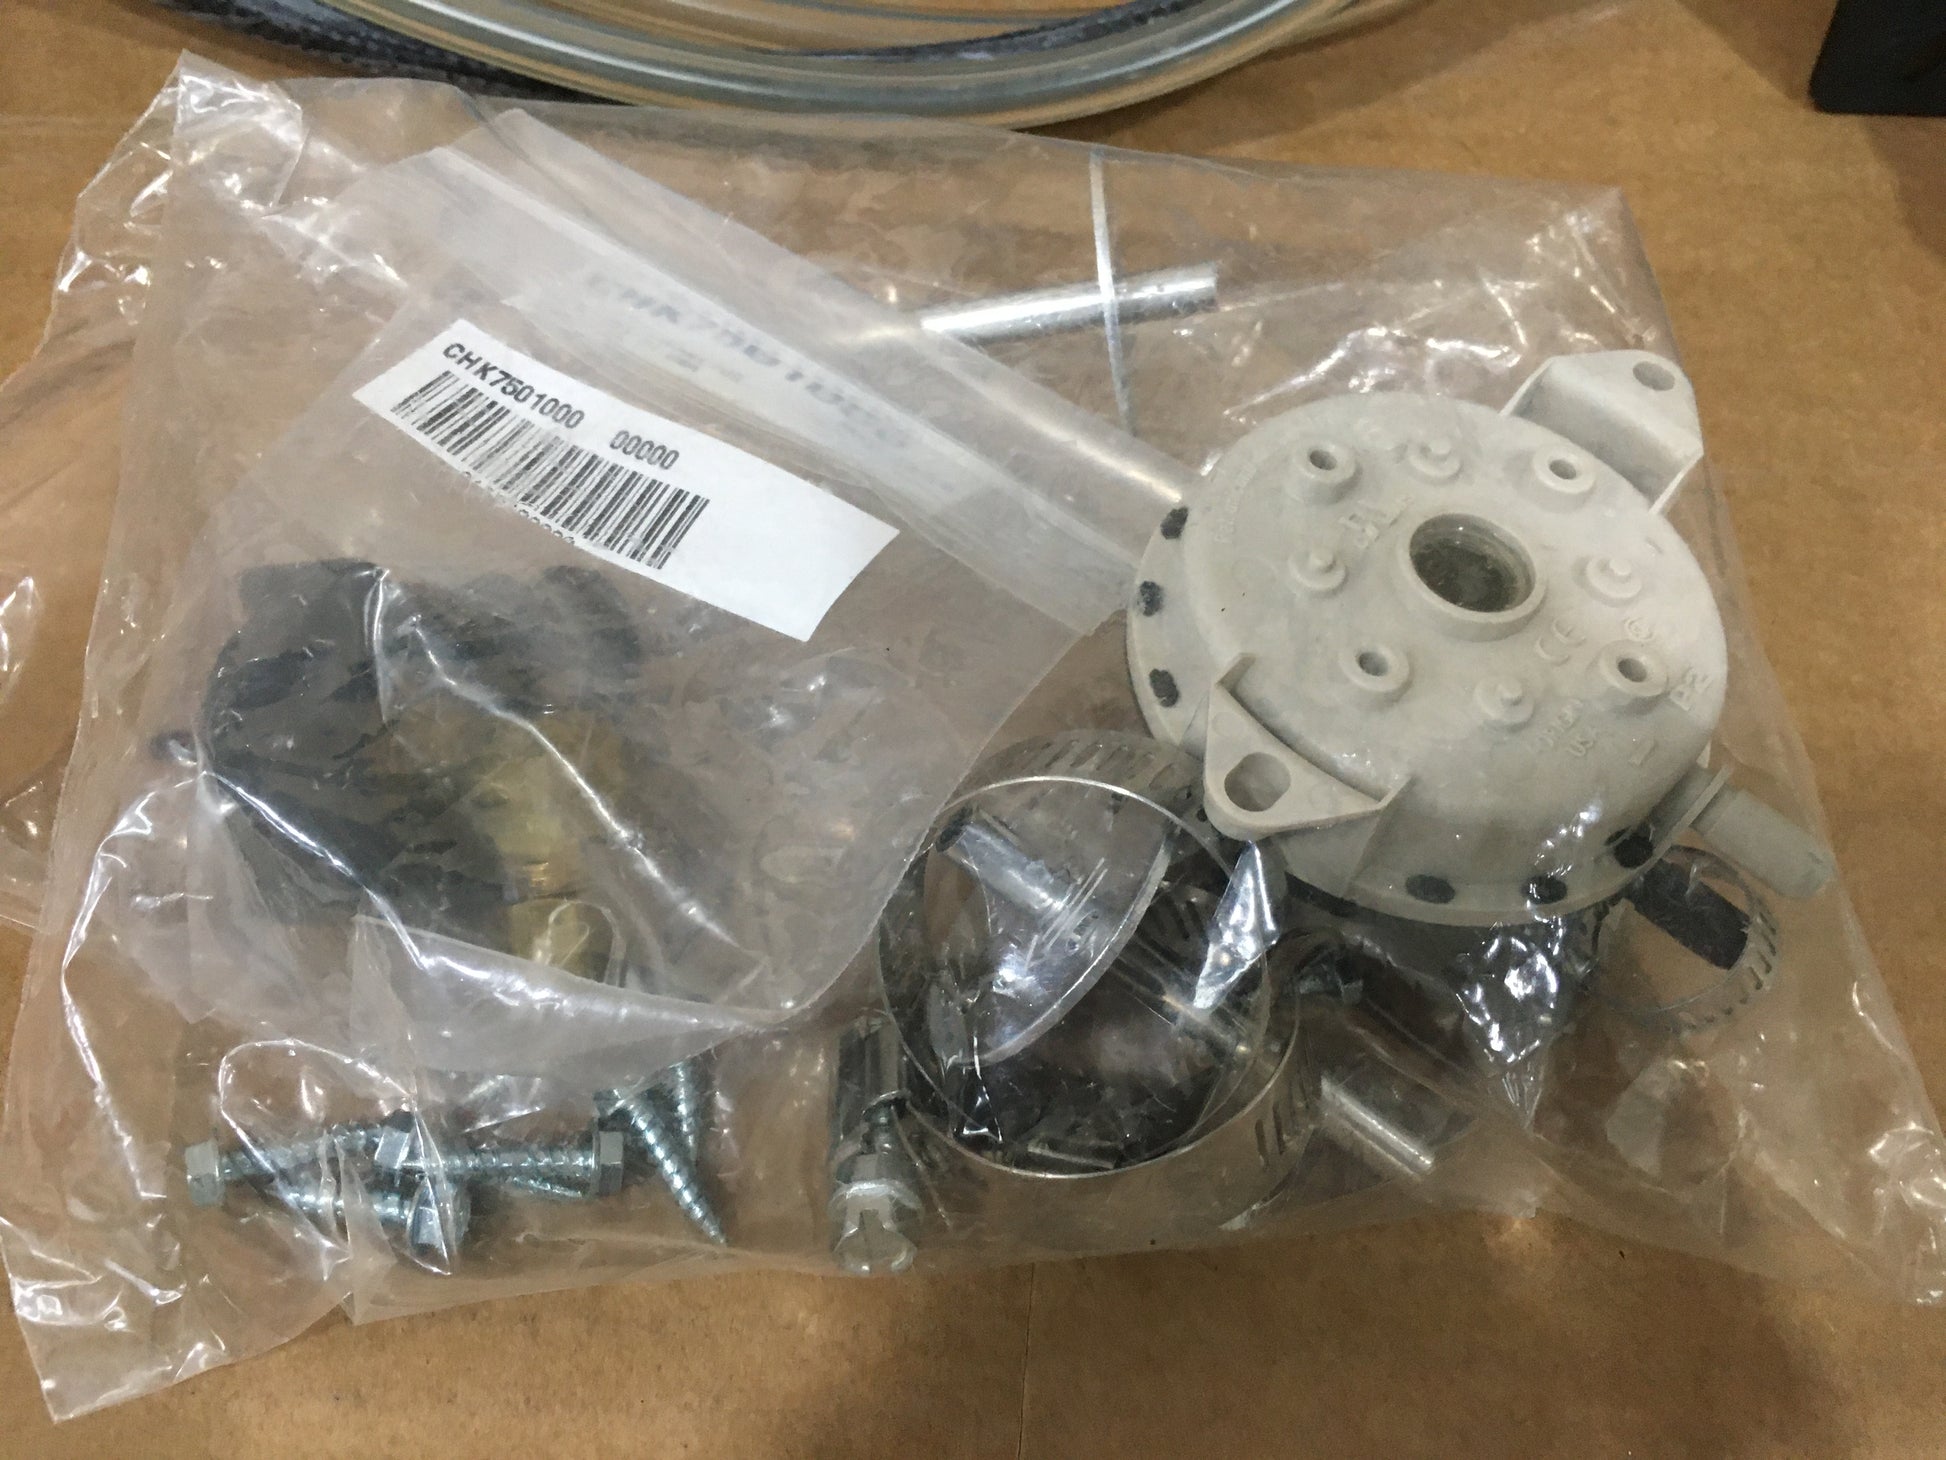 DUCT MOUNT KIT FOR RESIDENTIAL STEAM HUMIDIFIERS